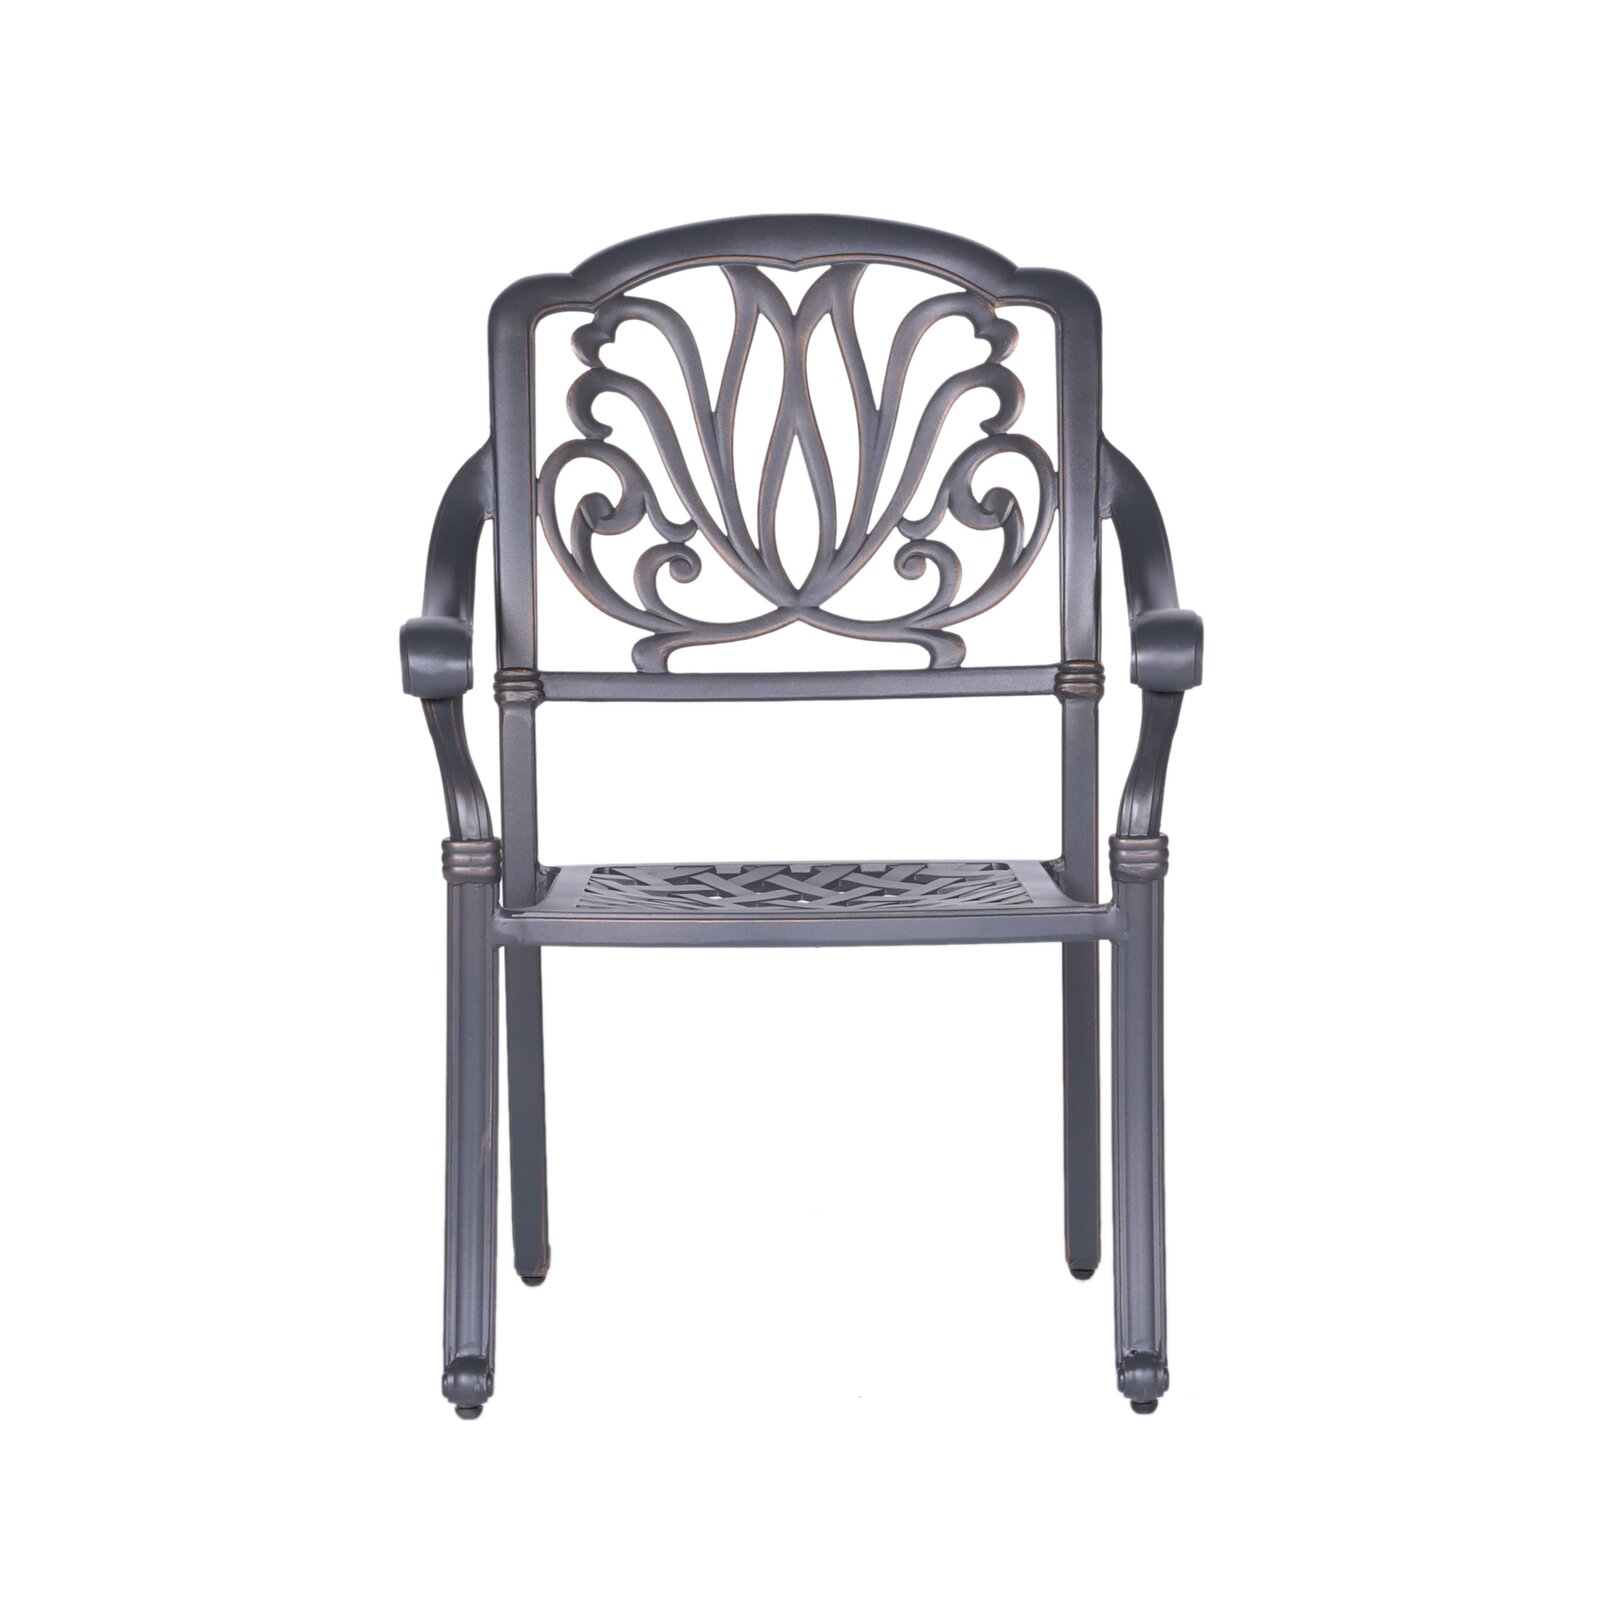 Kilmer Patio Dining Chair with Cushion, Seat: 16" H, Stacking: Yes - image 2 of 4